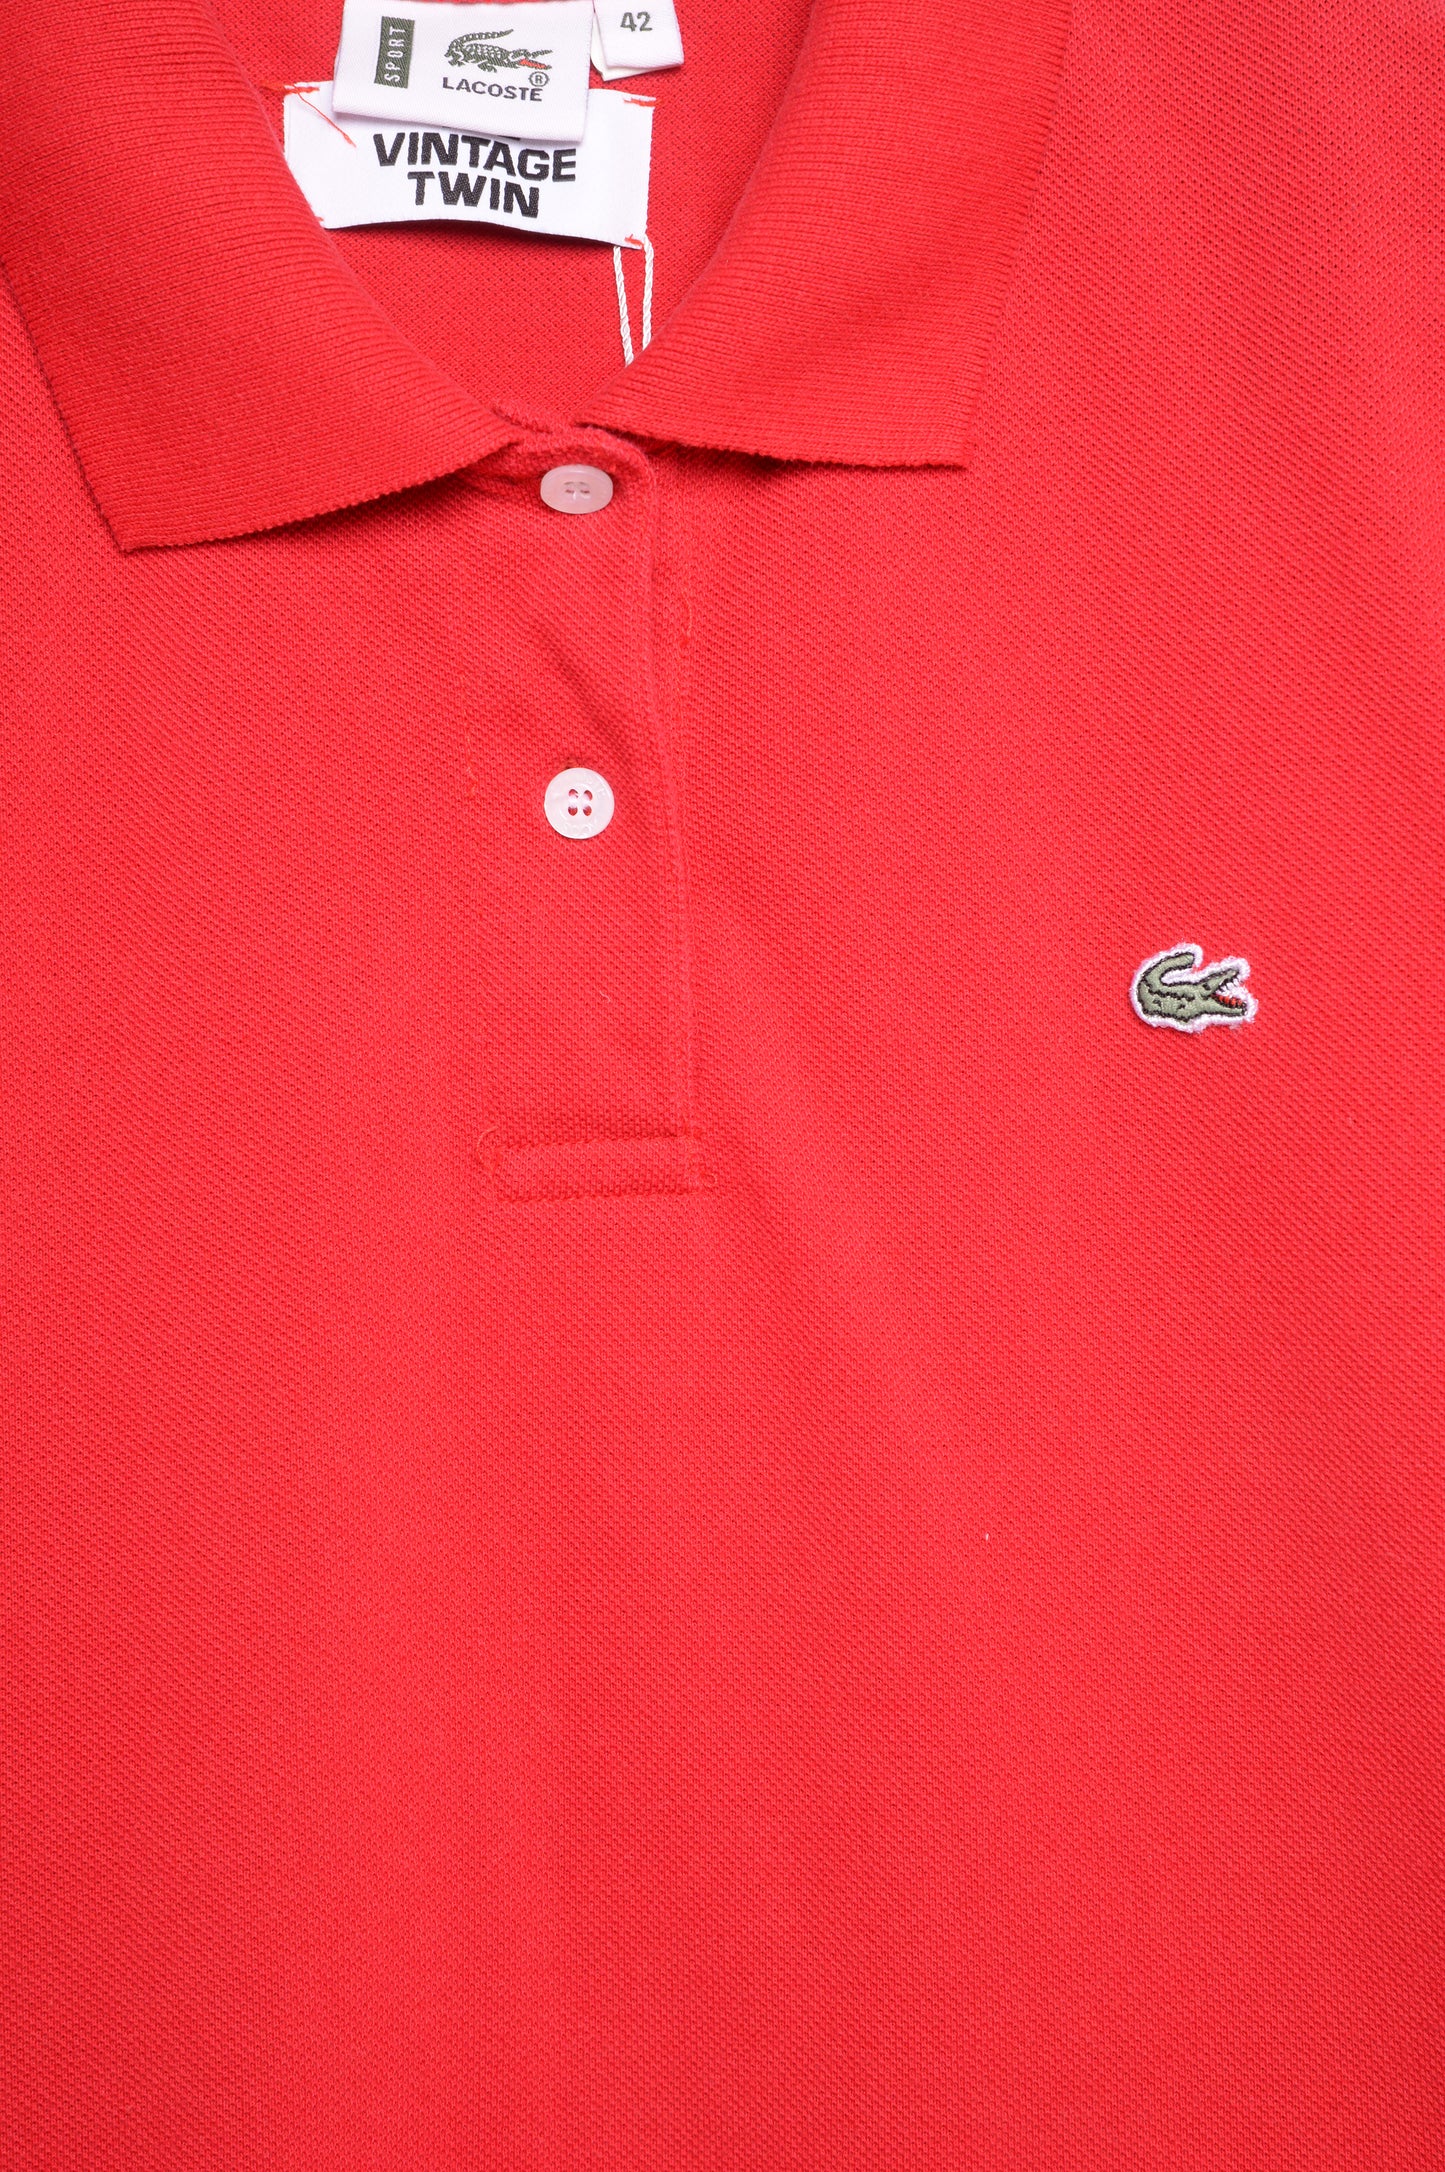 Lacoste Cropped Polo